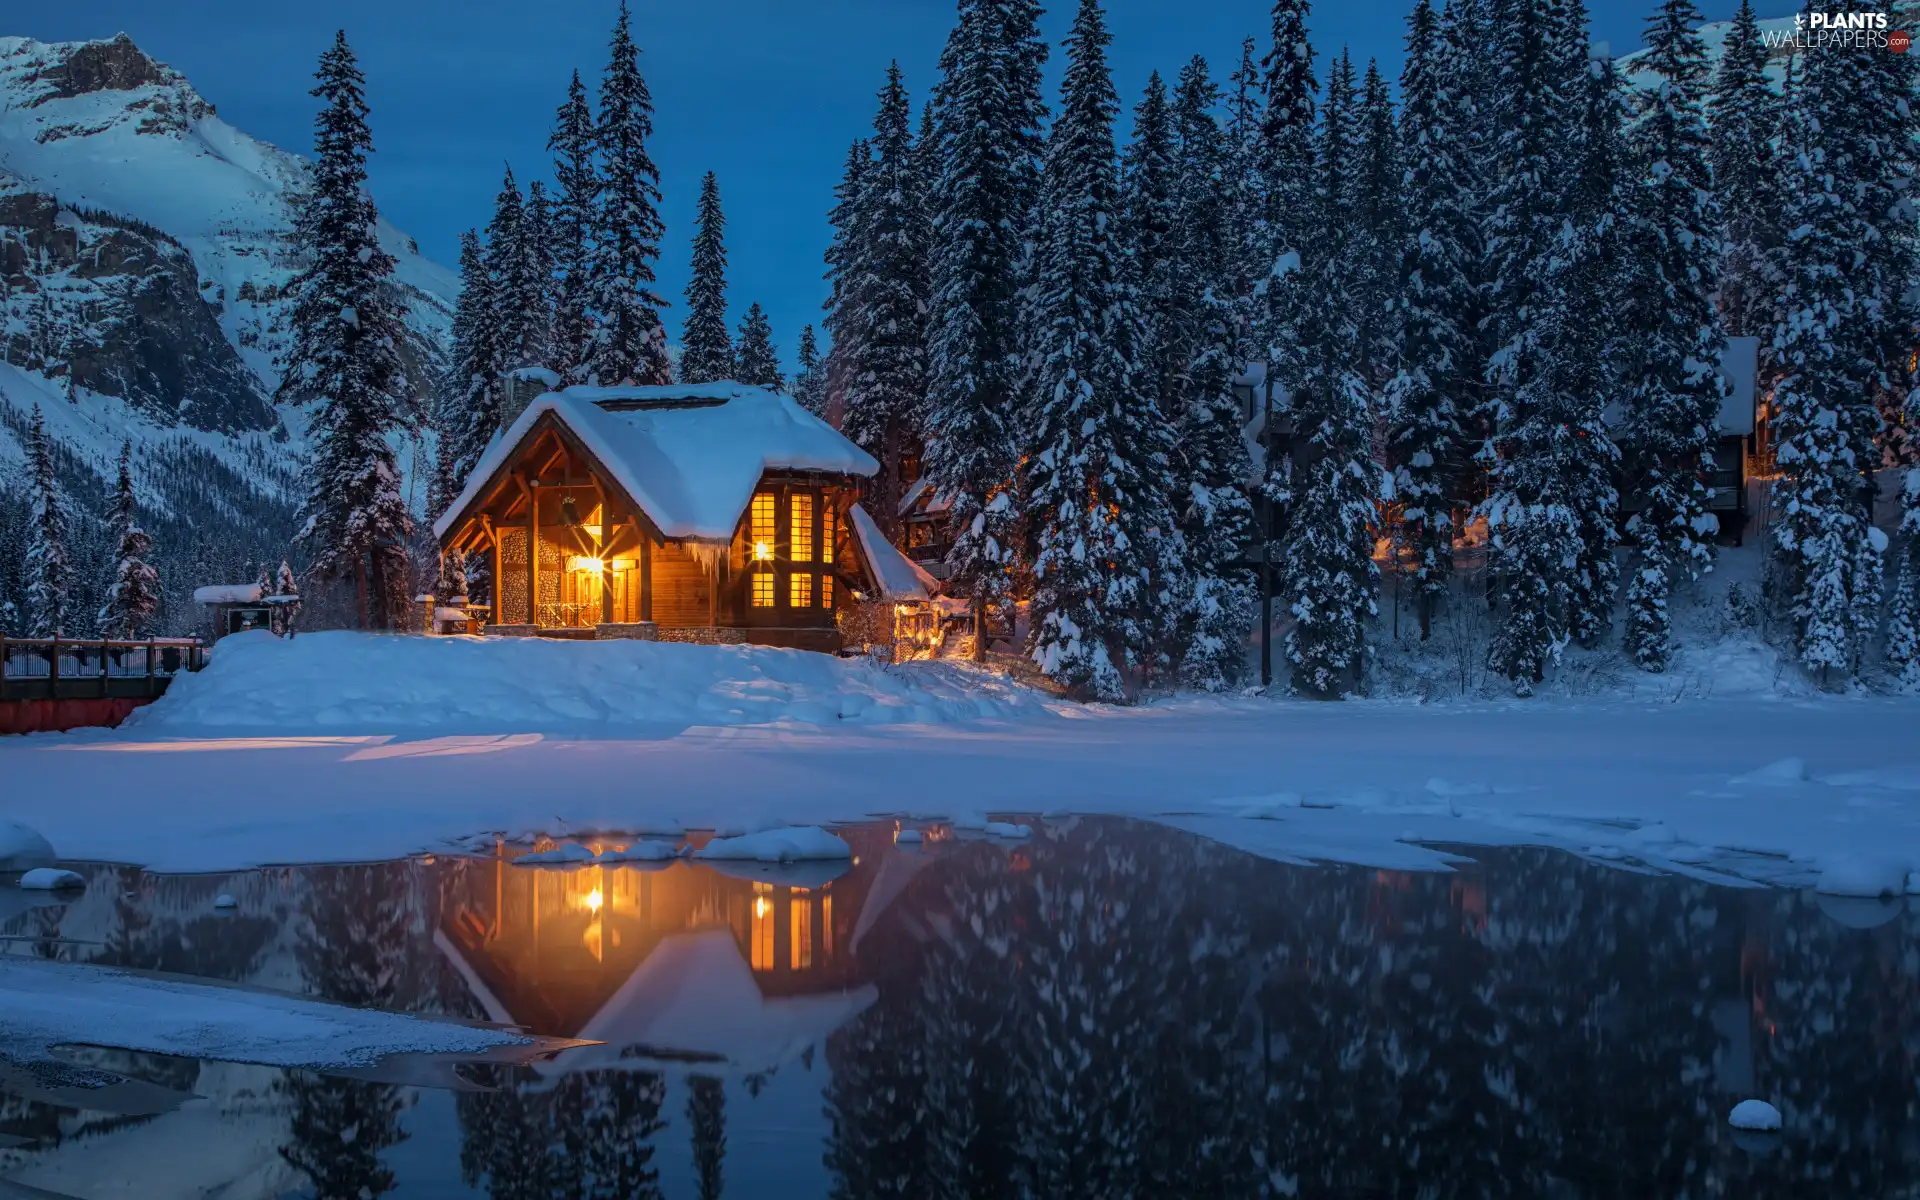 house, Mountains, Yoho National Park, snow, Canada, lake, forest, light, trees, winter, evening, Emerald Lake, viewes